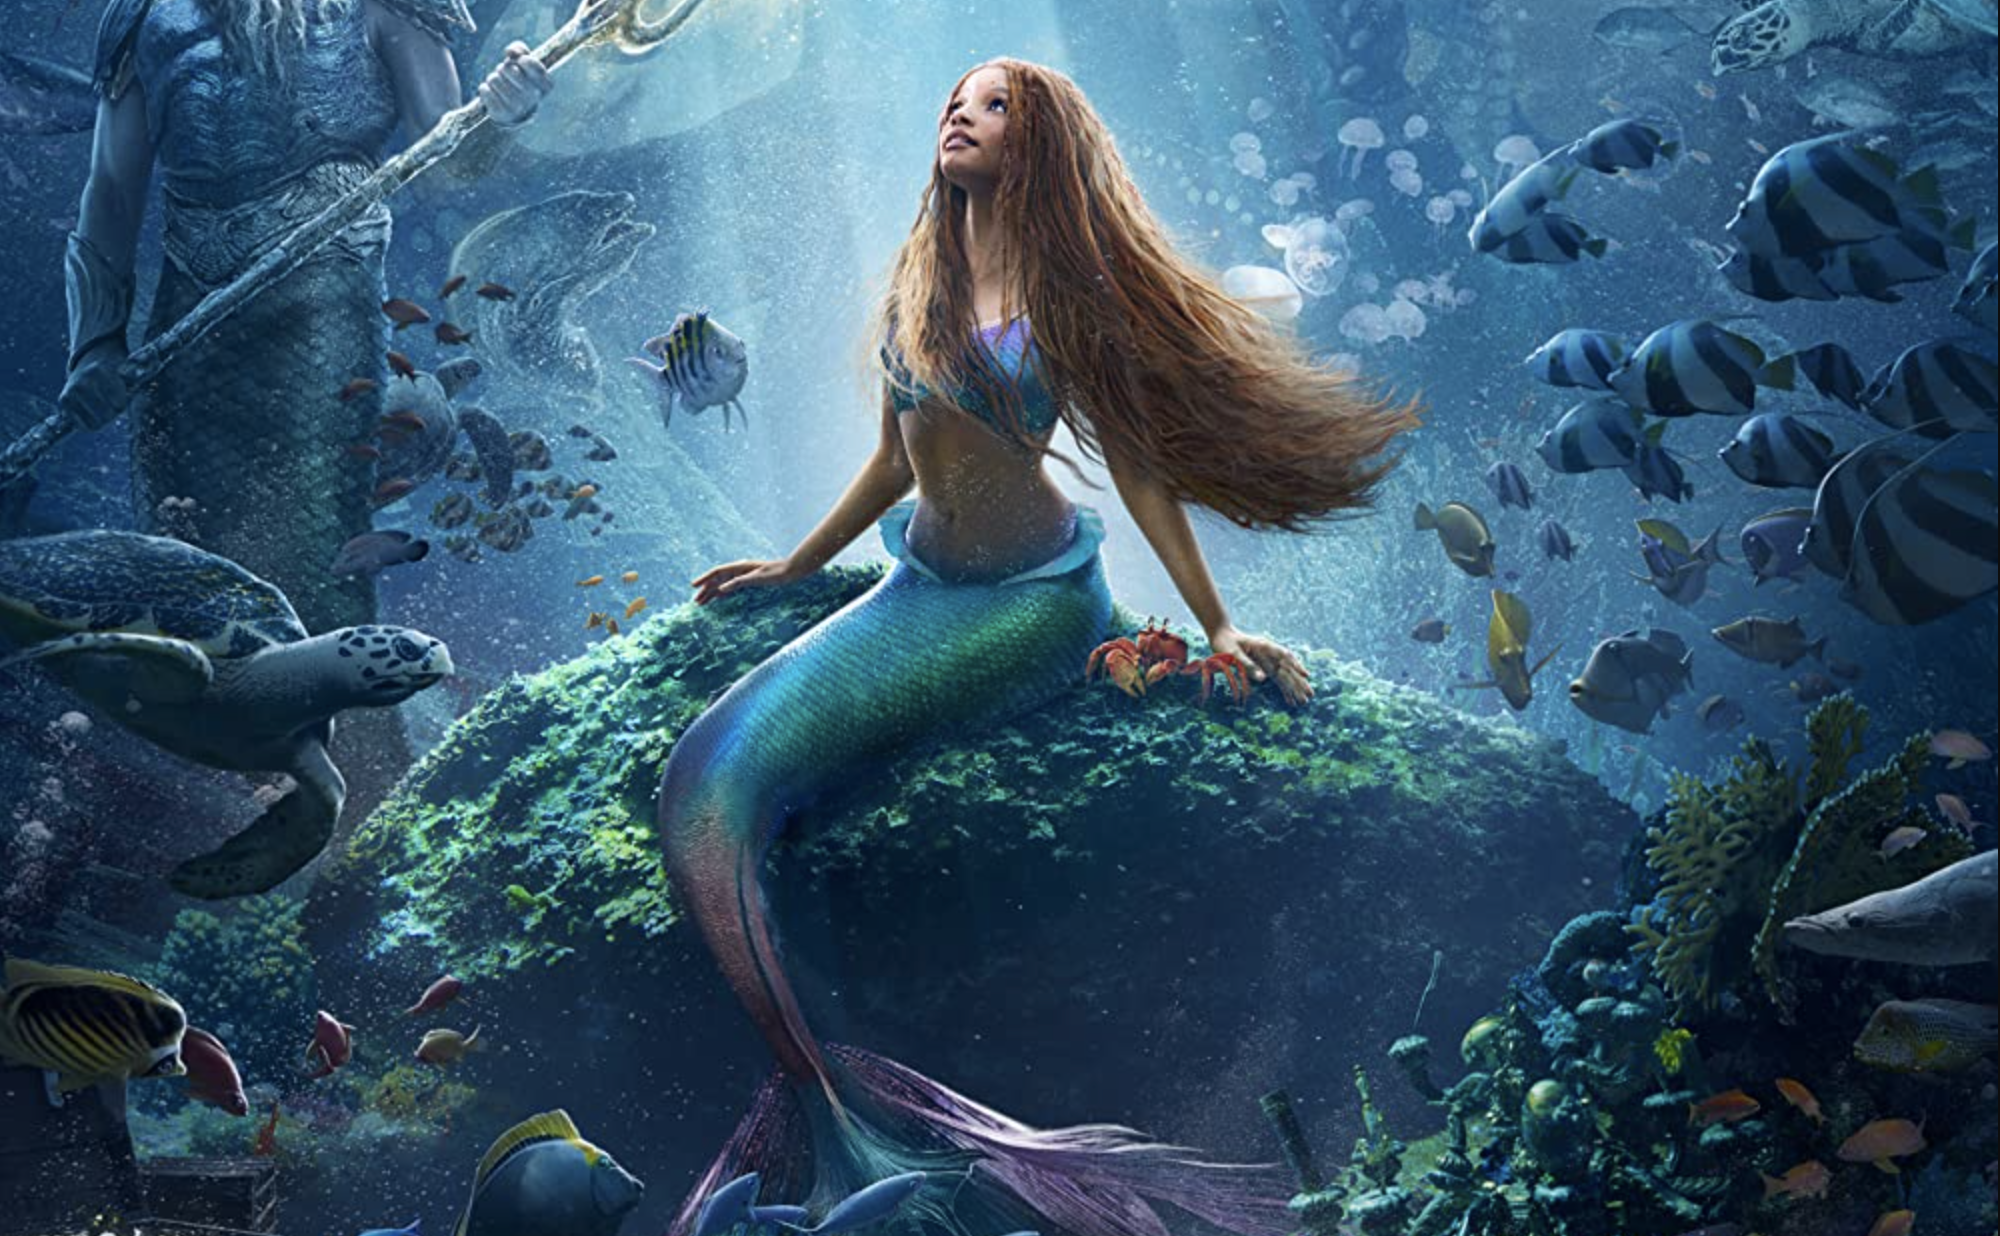 ‘The Little Mermaid’ Is A Magical Win For Disney – Review